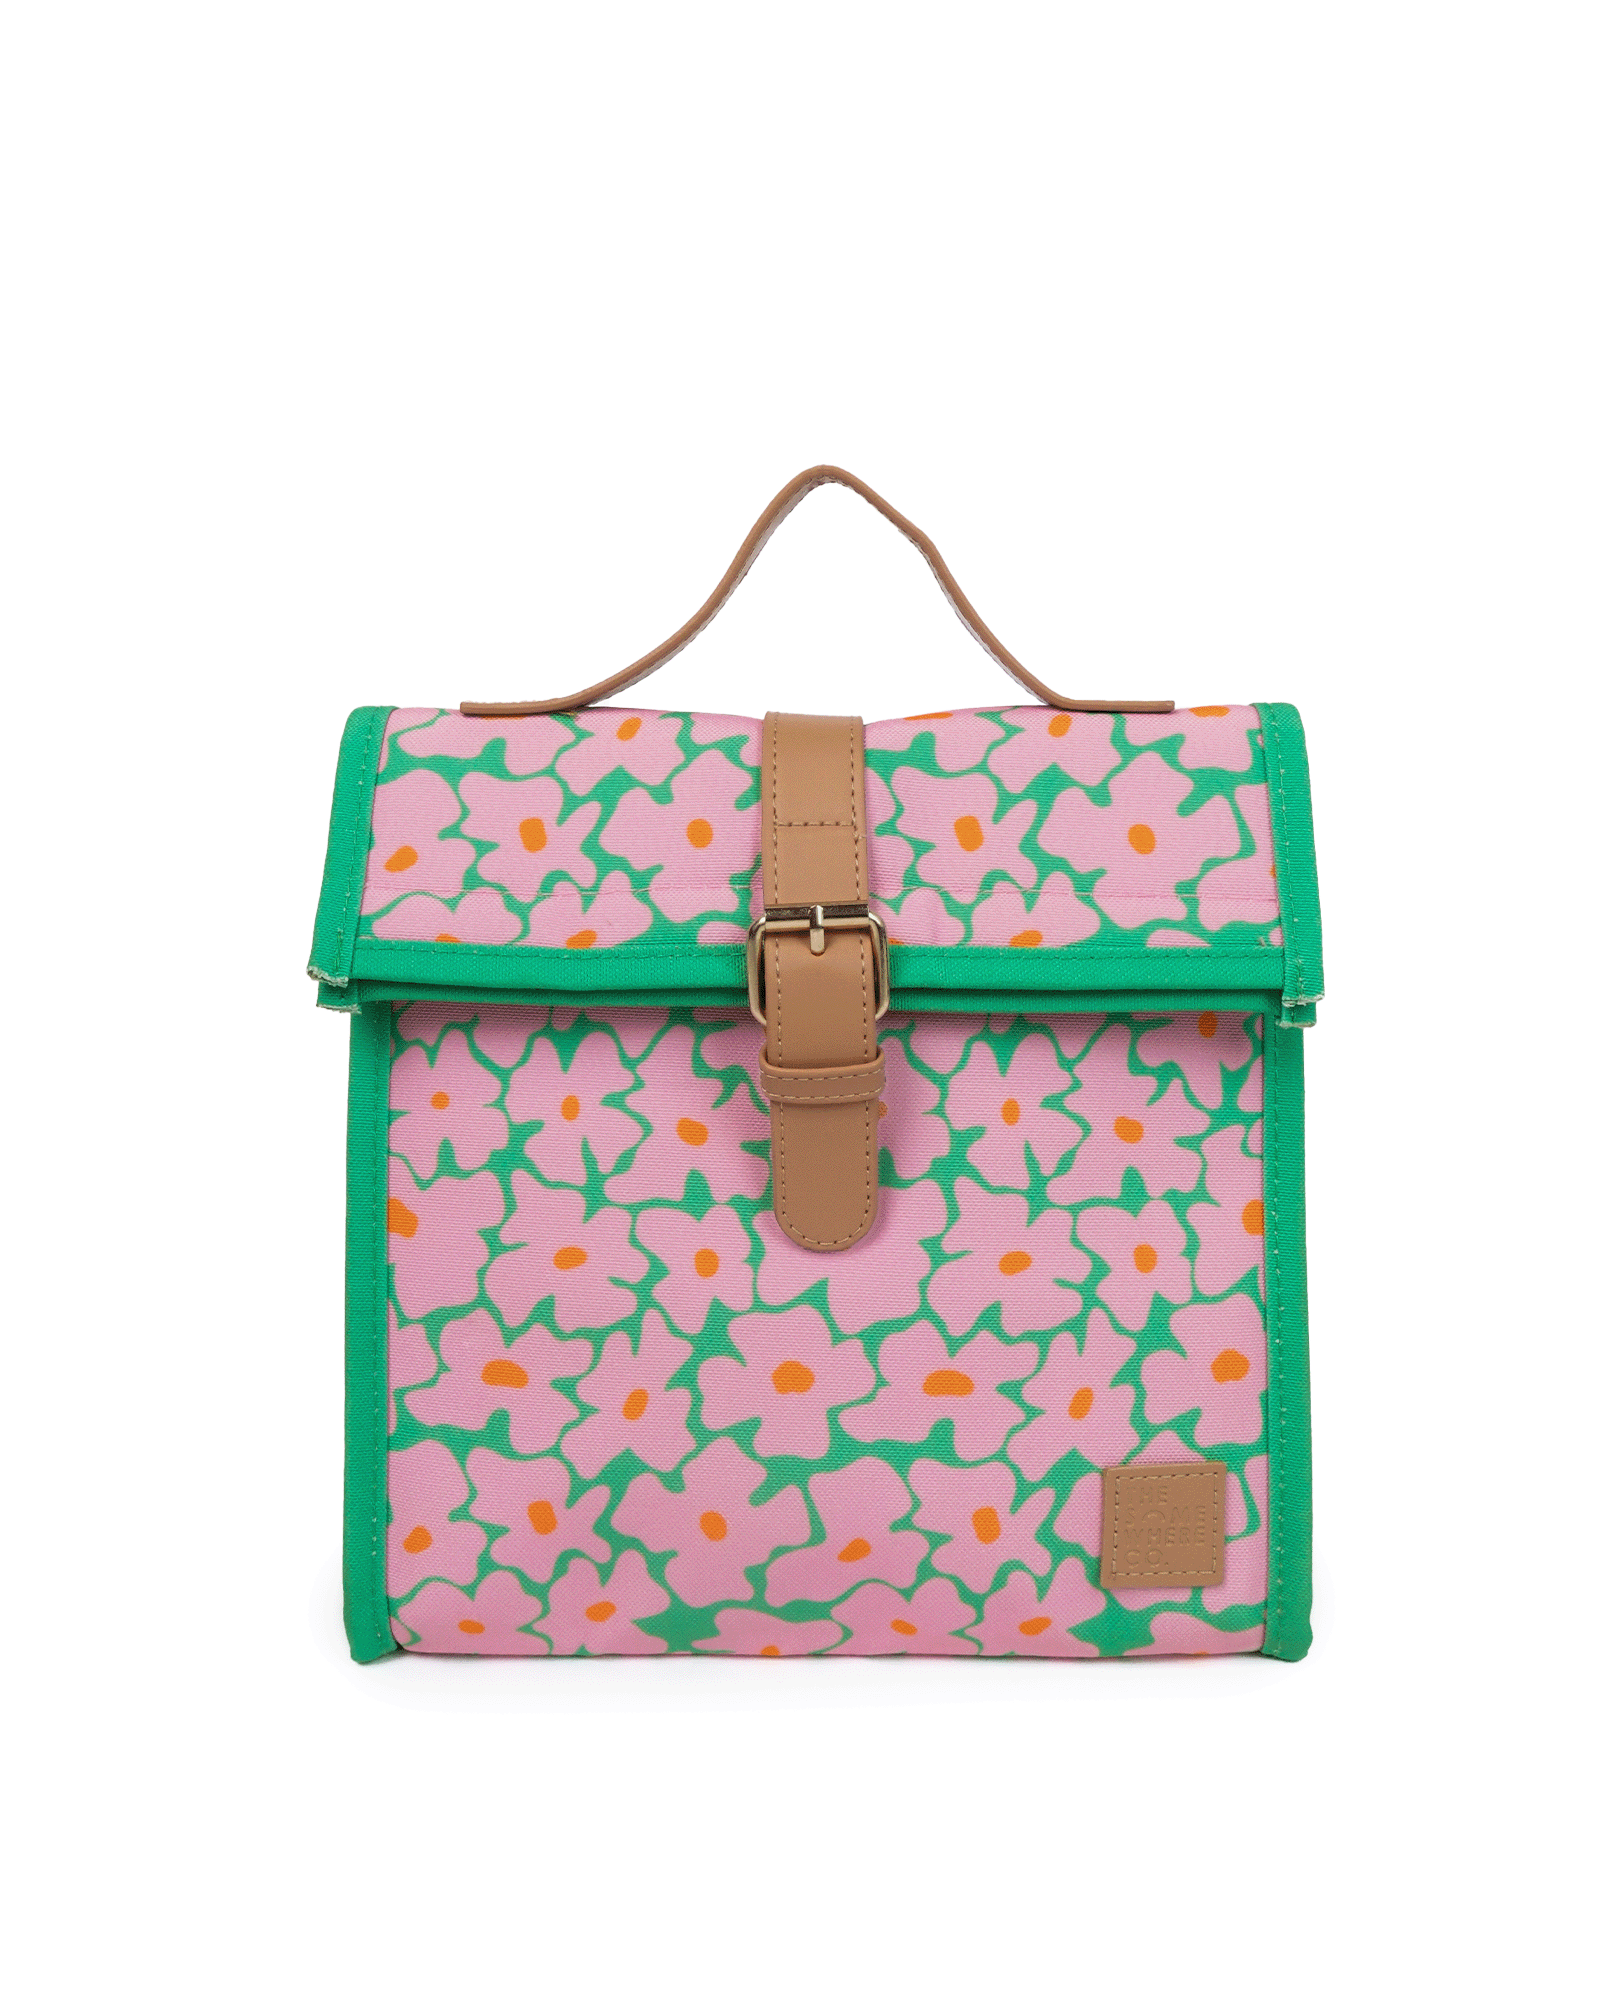 Blossom Lunch Satchel